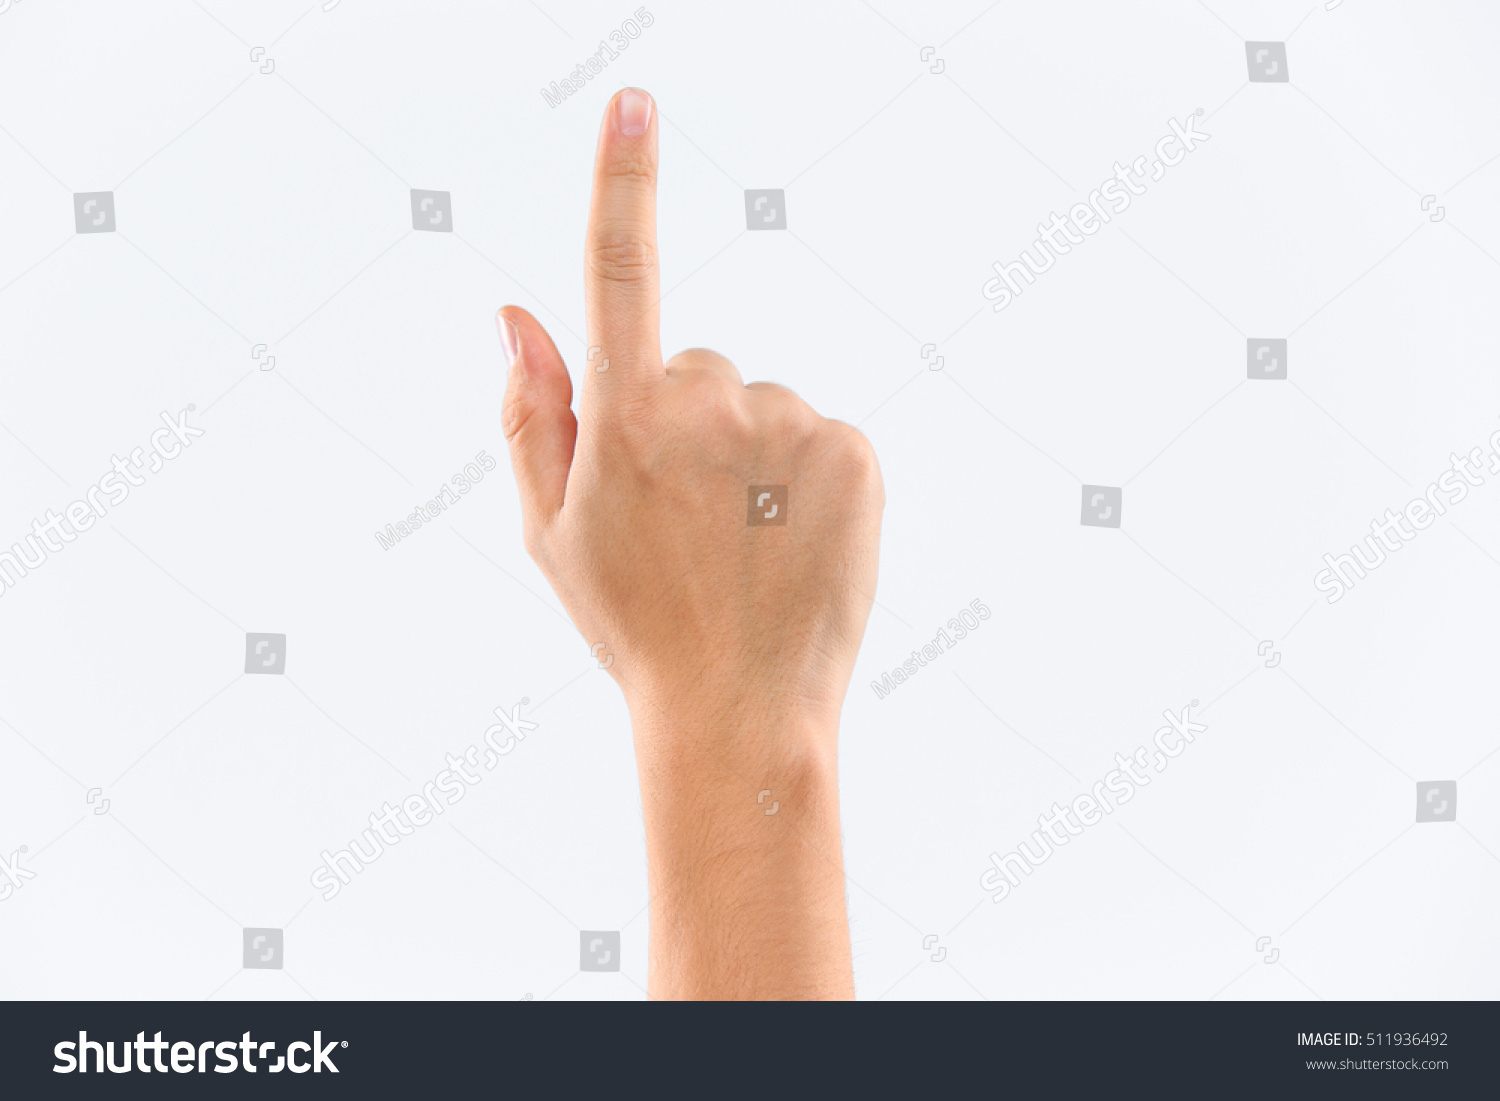 The man's hand isolated on white background #511936492